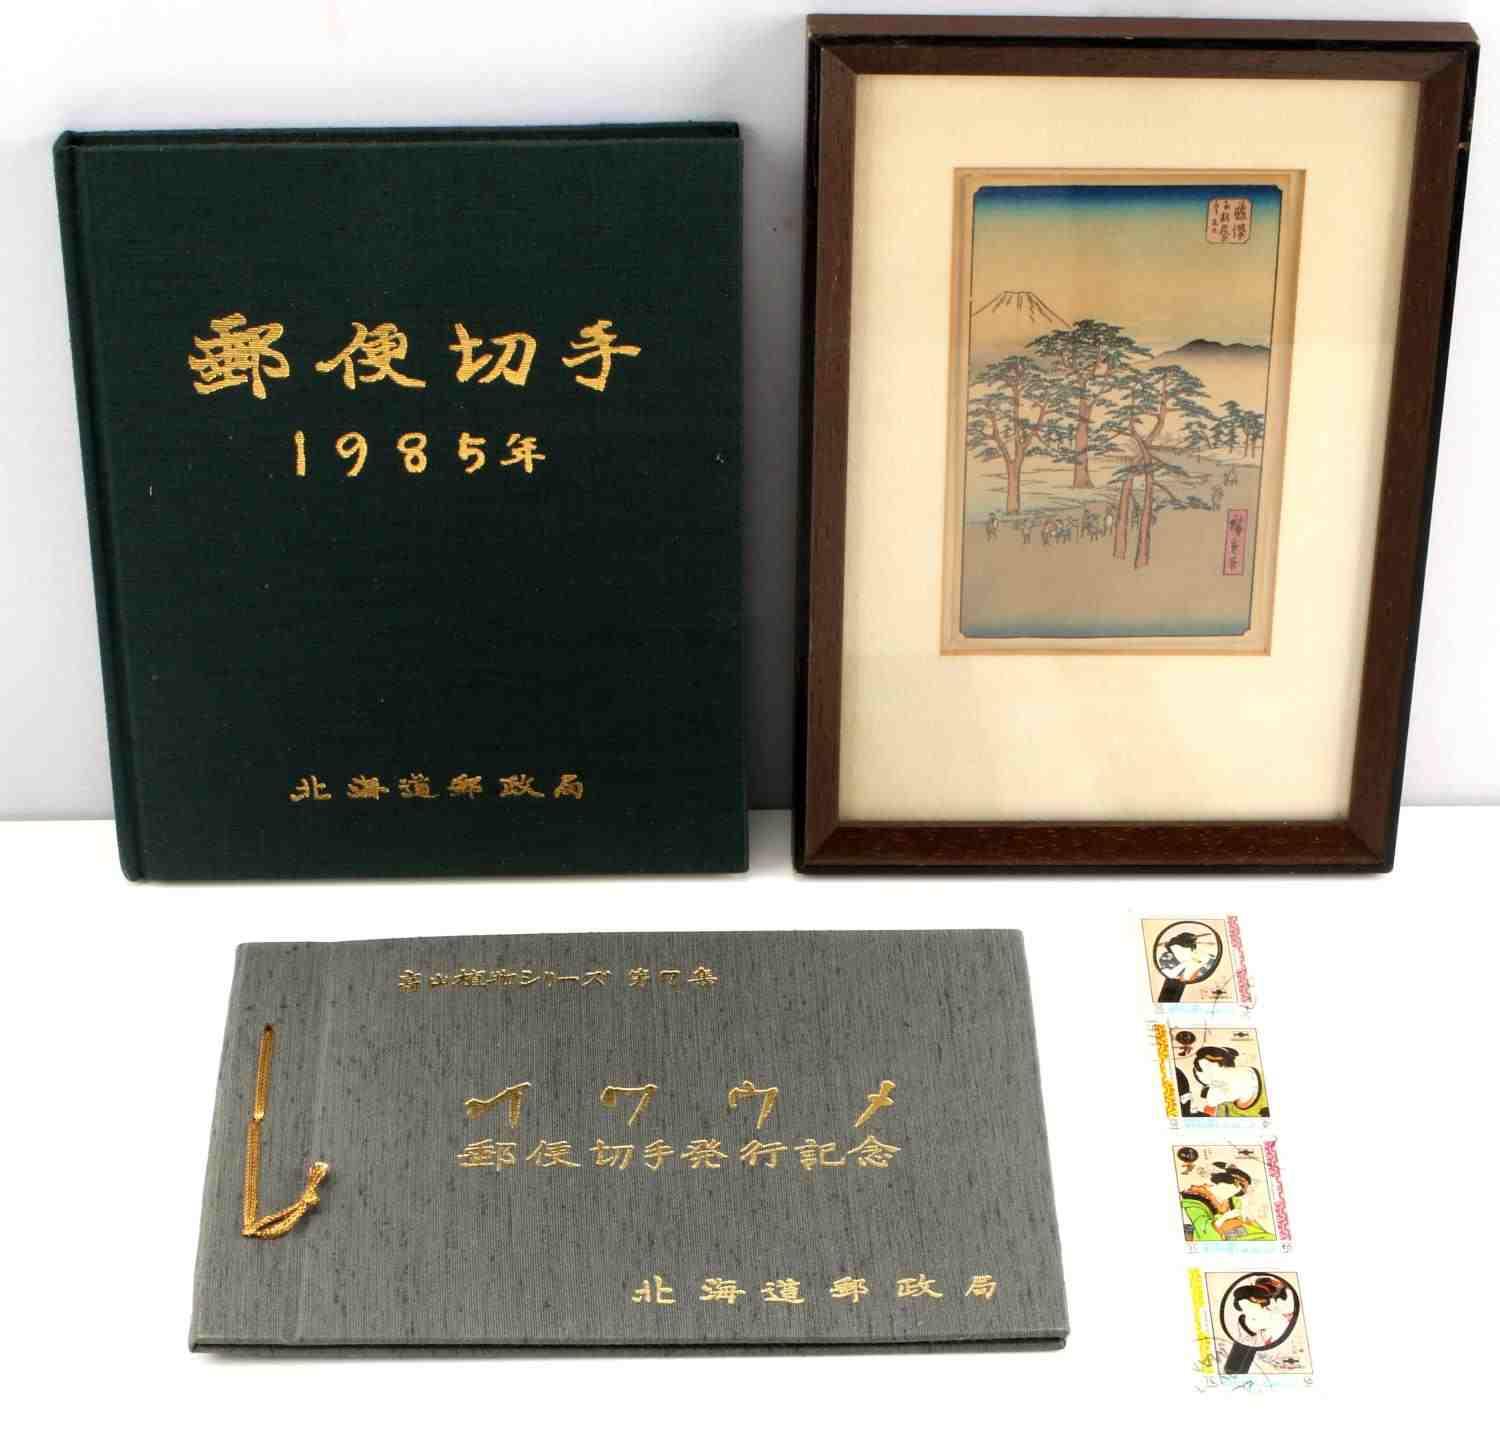 JAPANESE STAMP COLLECTION BOOK 1985 & POST CARD